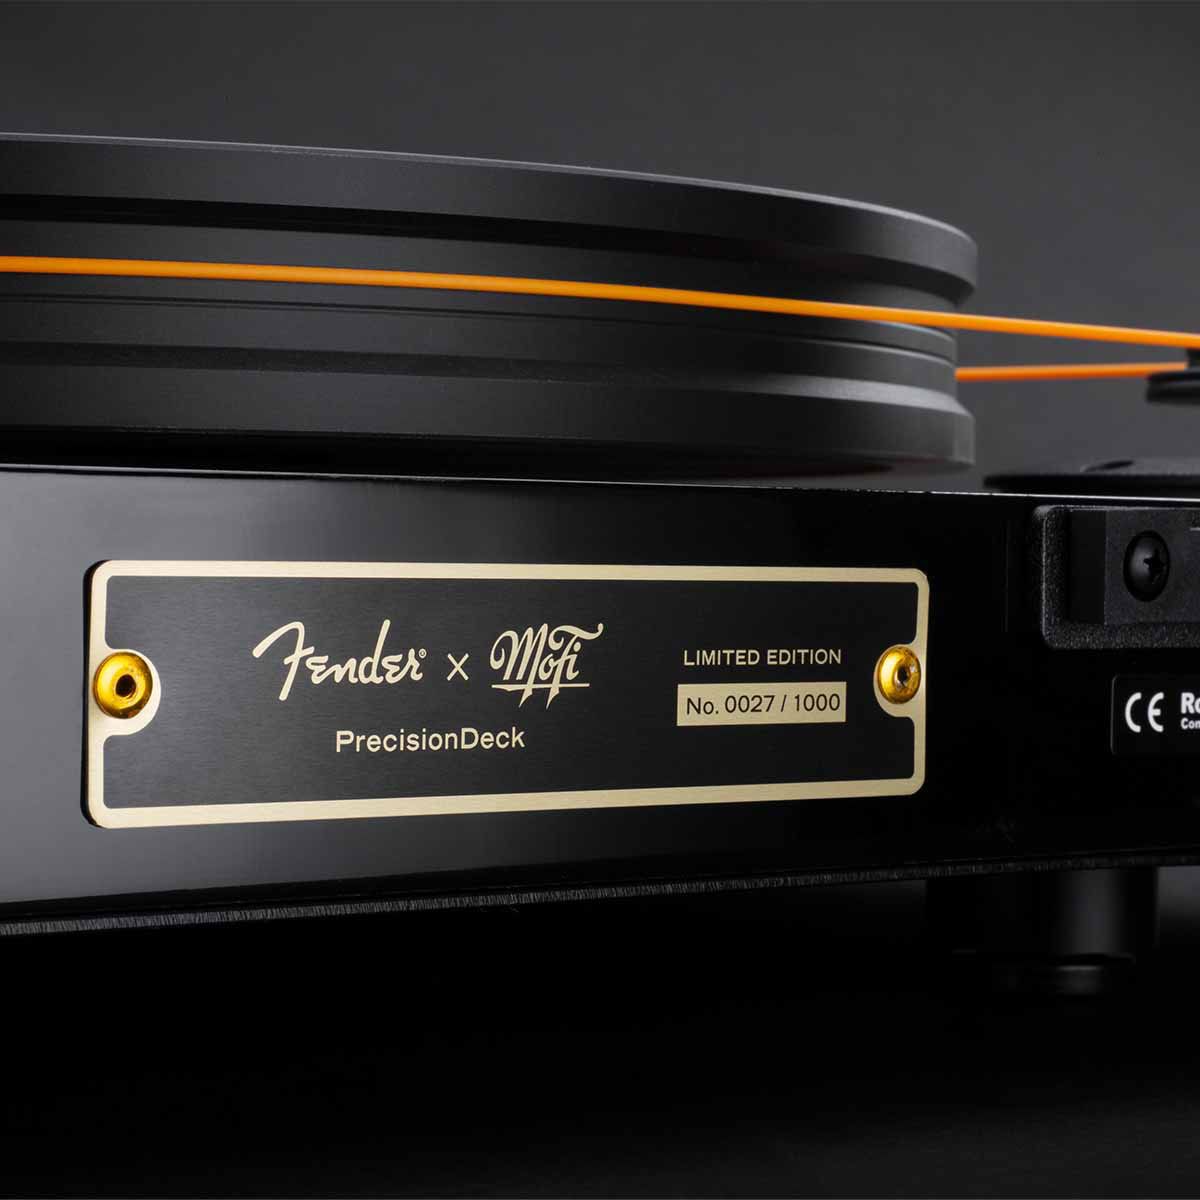 MoFi Fender PrecisionDeck Turntable, Sunburst, detailed view of rear collector's plate